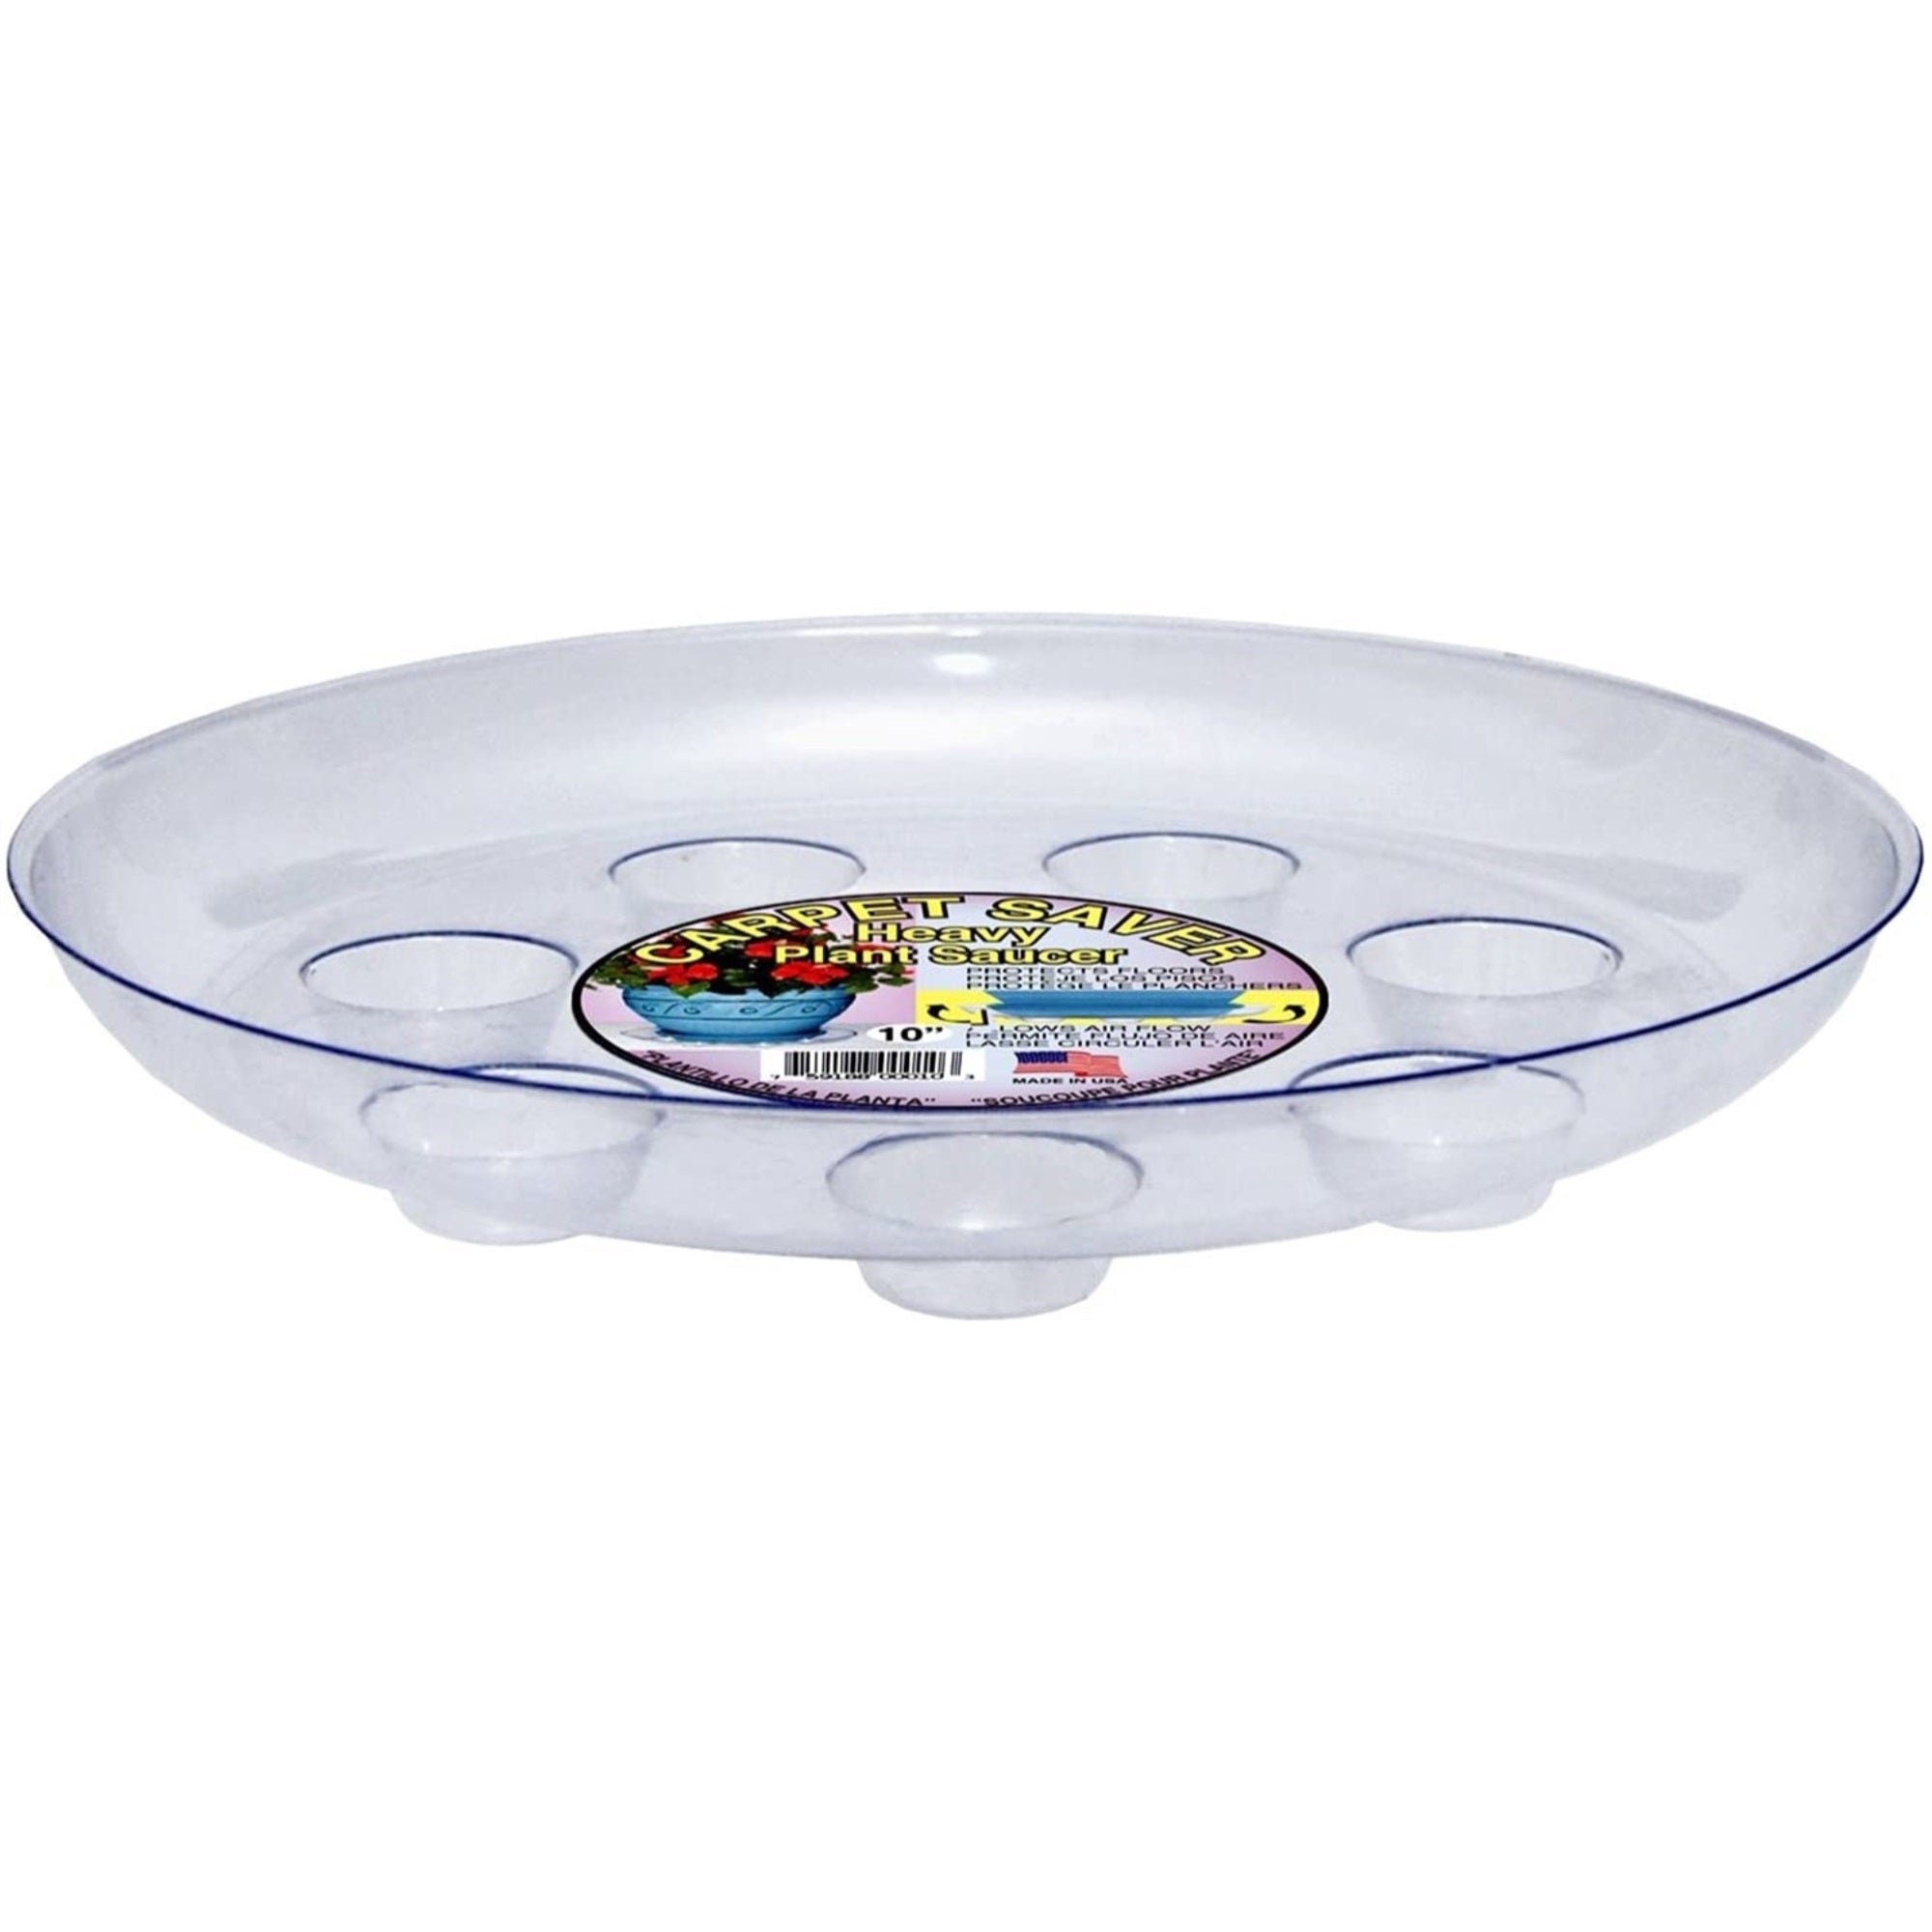 CWP Heavy Gauge Footed Plastic Saucer, Clear, 10-Inch"